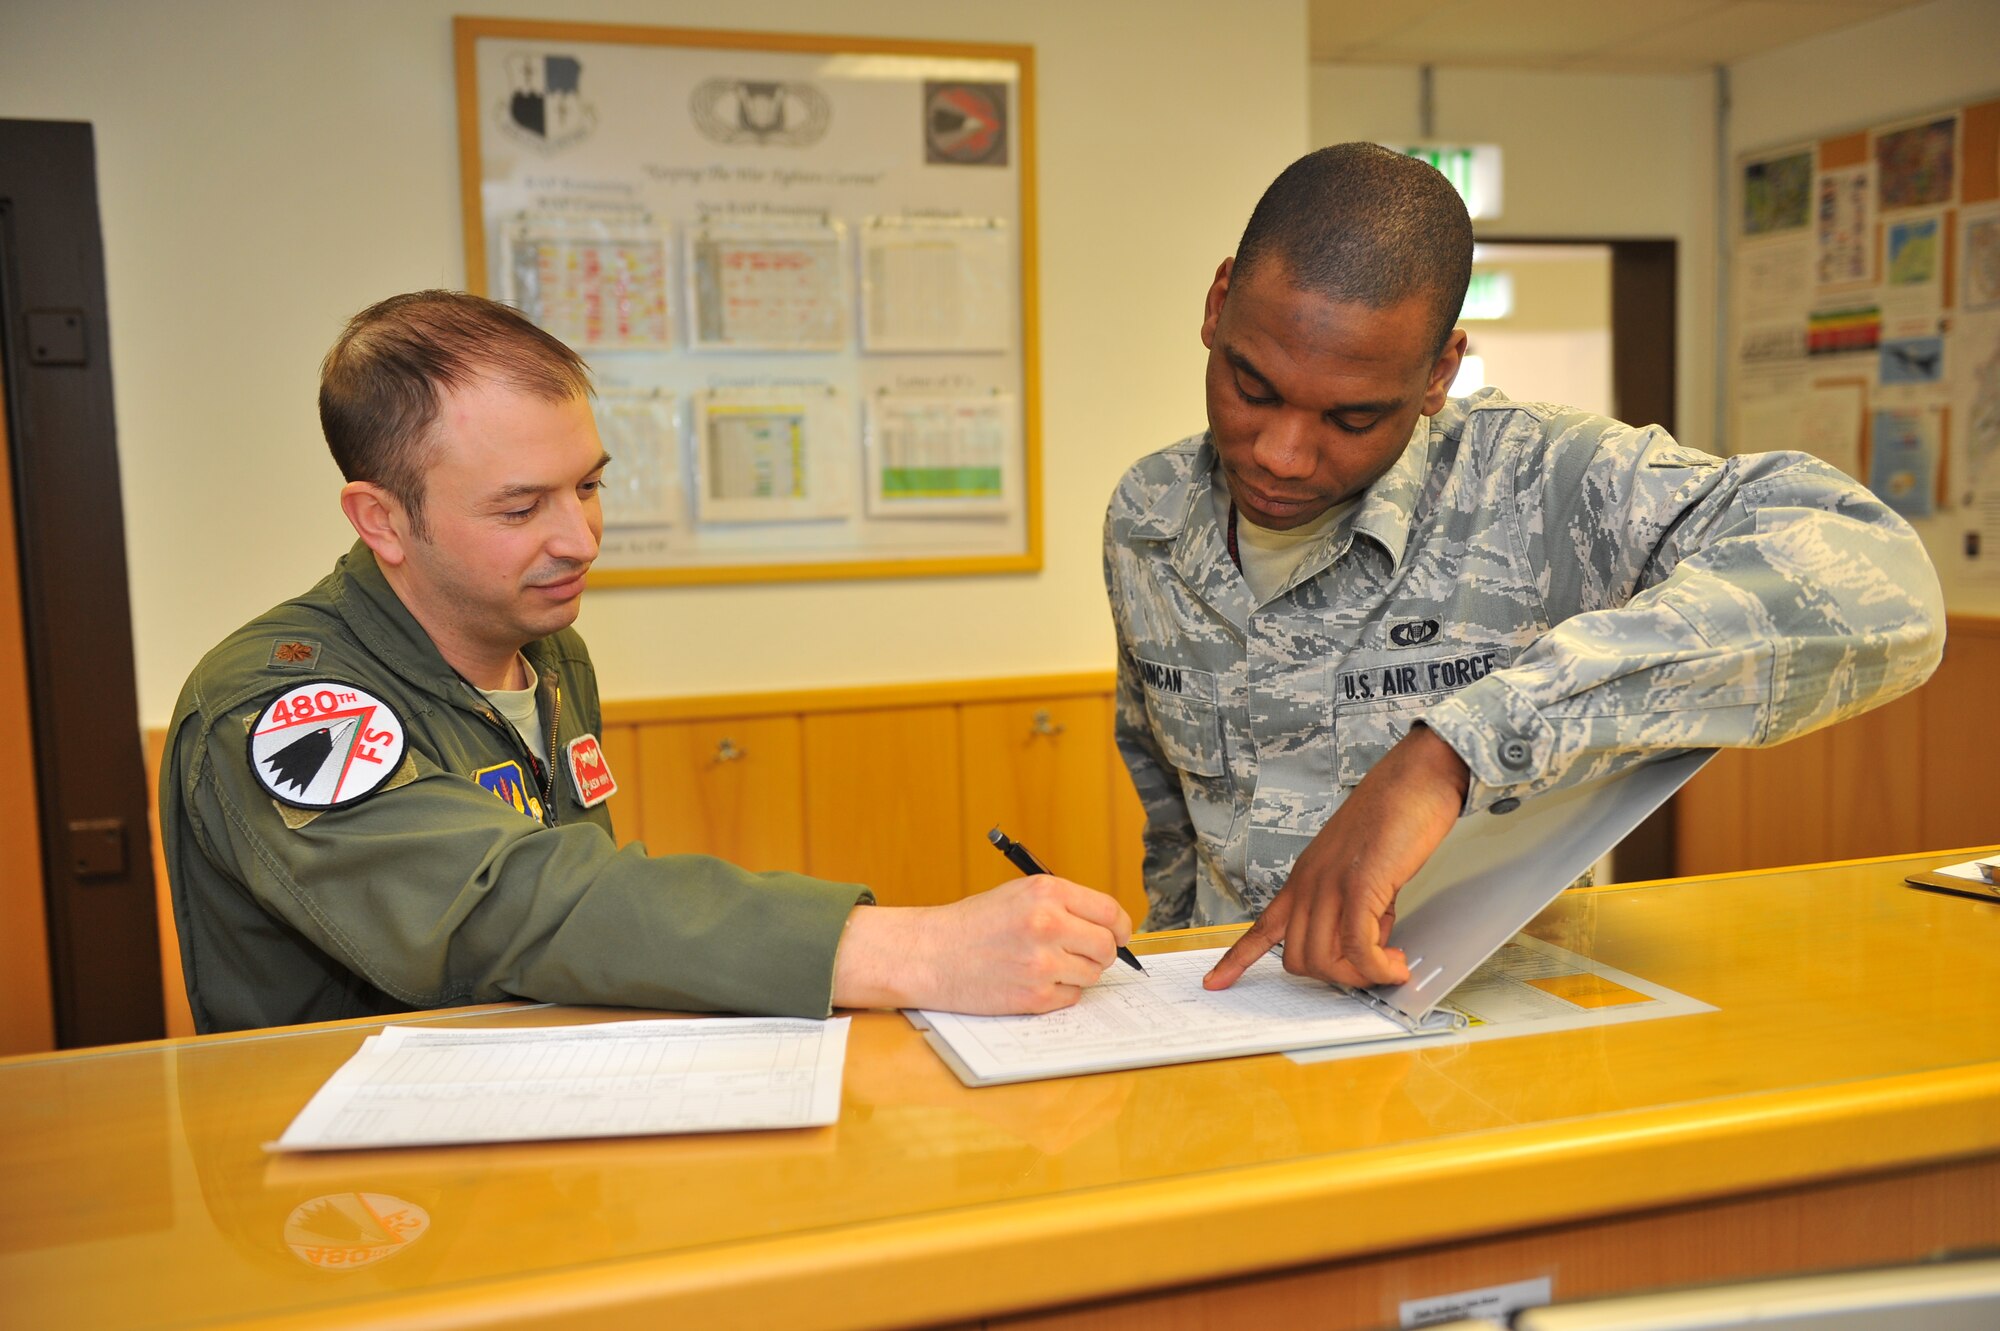 SPANGDAHLEM AIR BASE, Germany – Maj. Jason Hrynyk, left, 480th Fighter Squadron operations desk supervisor, and Airman 1st Class Keith Duncan, 480th FS aviation resource management apprentice, fill out a flight authorization form inside Bldg. 108 here Feb. 21 before adding the pilots’ training hours to their records. Twelve Airmen work at the squadron’s operations desk and are responsible for coordinating with base operations, weather operations and aircraft maintenance to ensure flight operations run smoothly. The operations desk is also responsible for gathering and organizing flight information to help log flight hours and brief pilots before, during and after flights. (U.S. Air Force photo by Airman 1st Class Dillon Davis/Released)